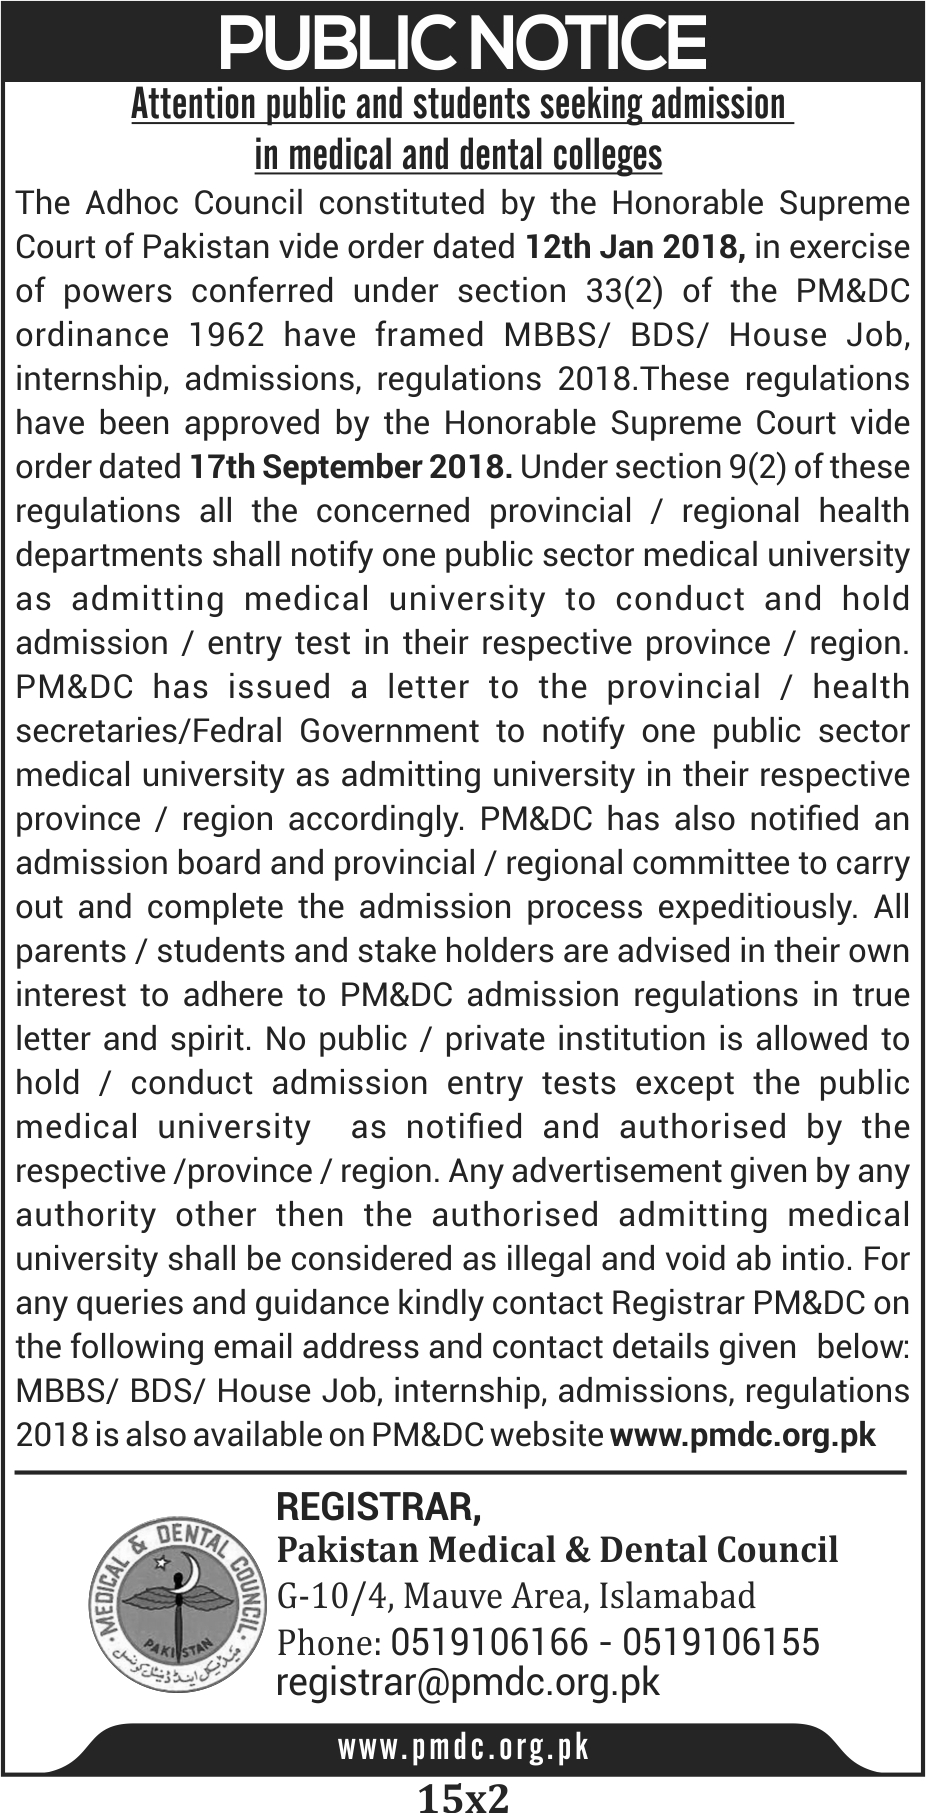 No Medical College can conduct its own entry test says PMDC